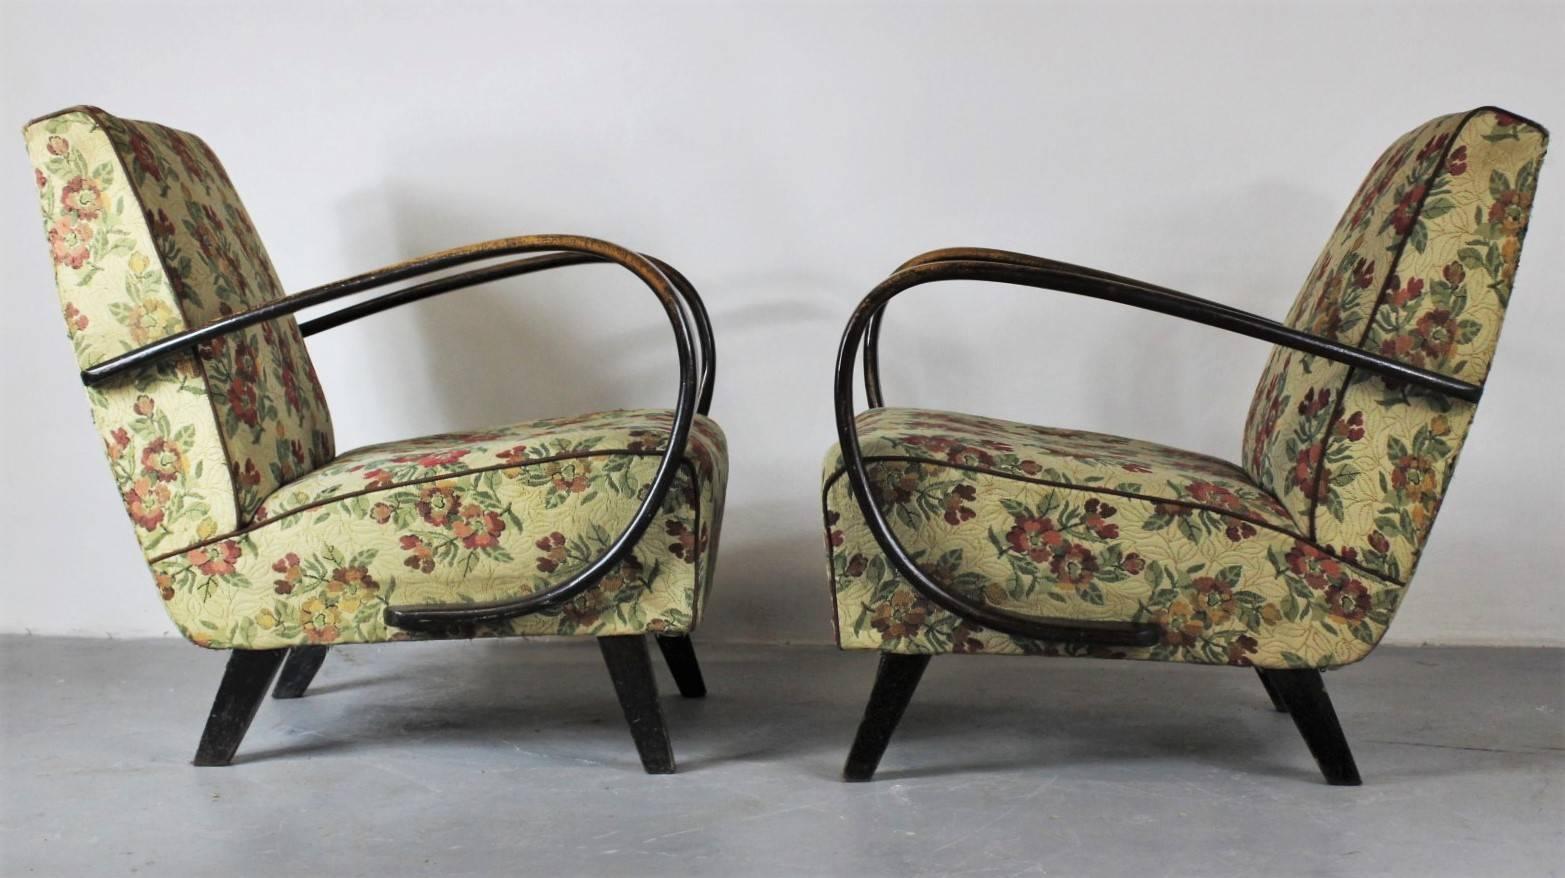 Pair of armchairs in original condition, very good and stabile construction, distressed upholstery, worn lacquer. The armchairs have been originally placed in a bakery meeting room in Prague. Two pairs available, price for one pair.